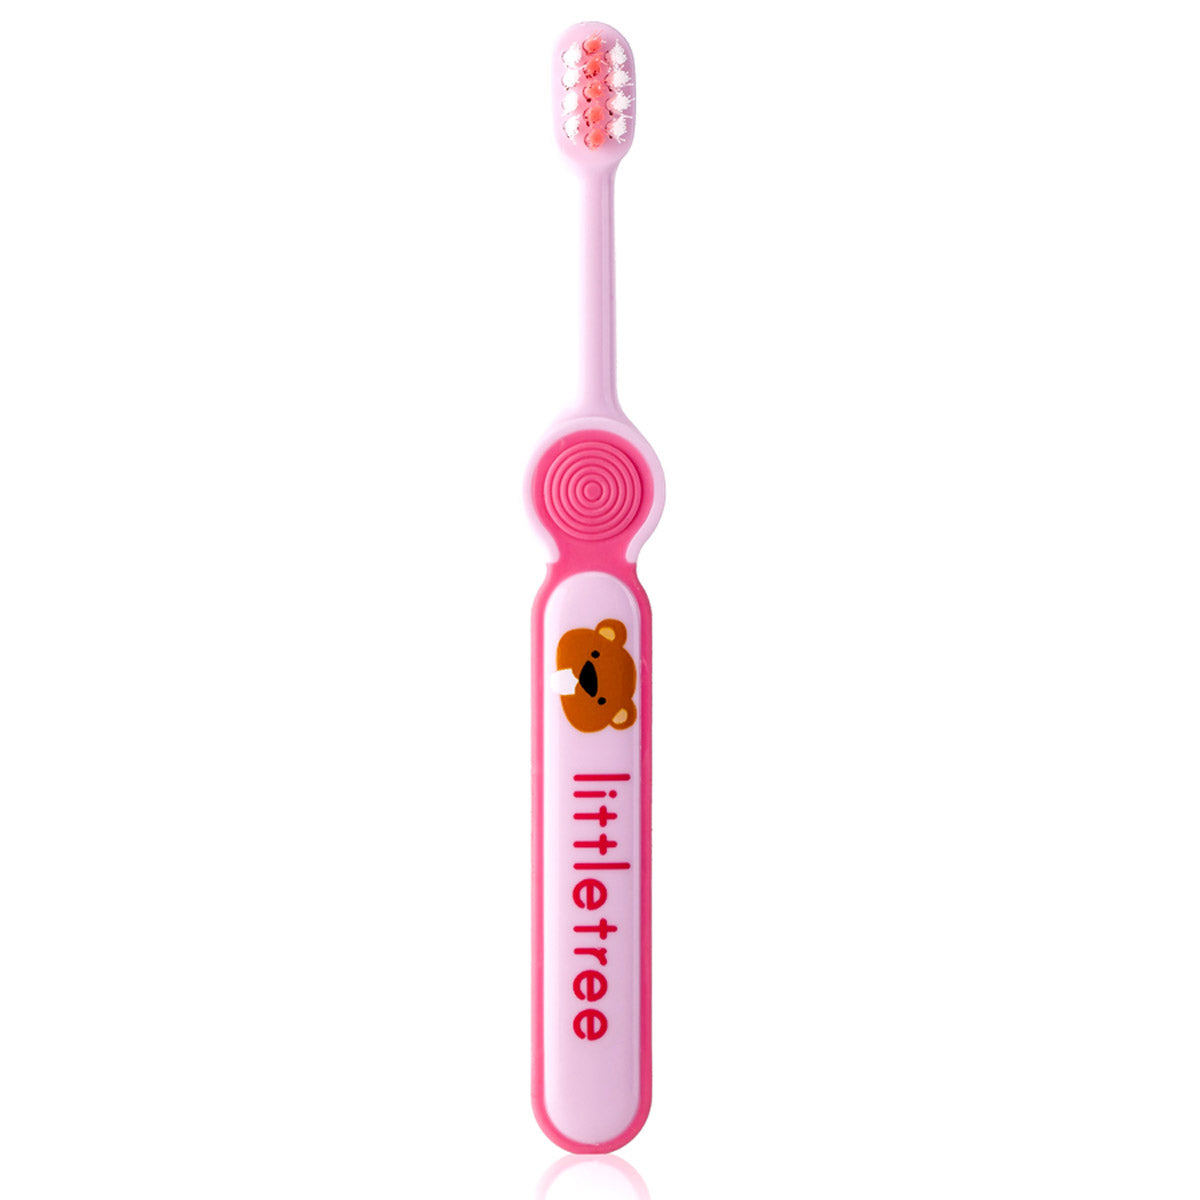 Little Tree Toothbrush 1-3 Years Old